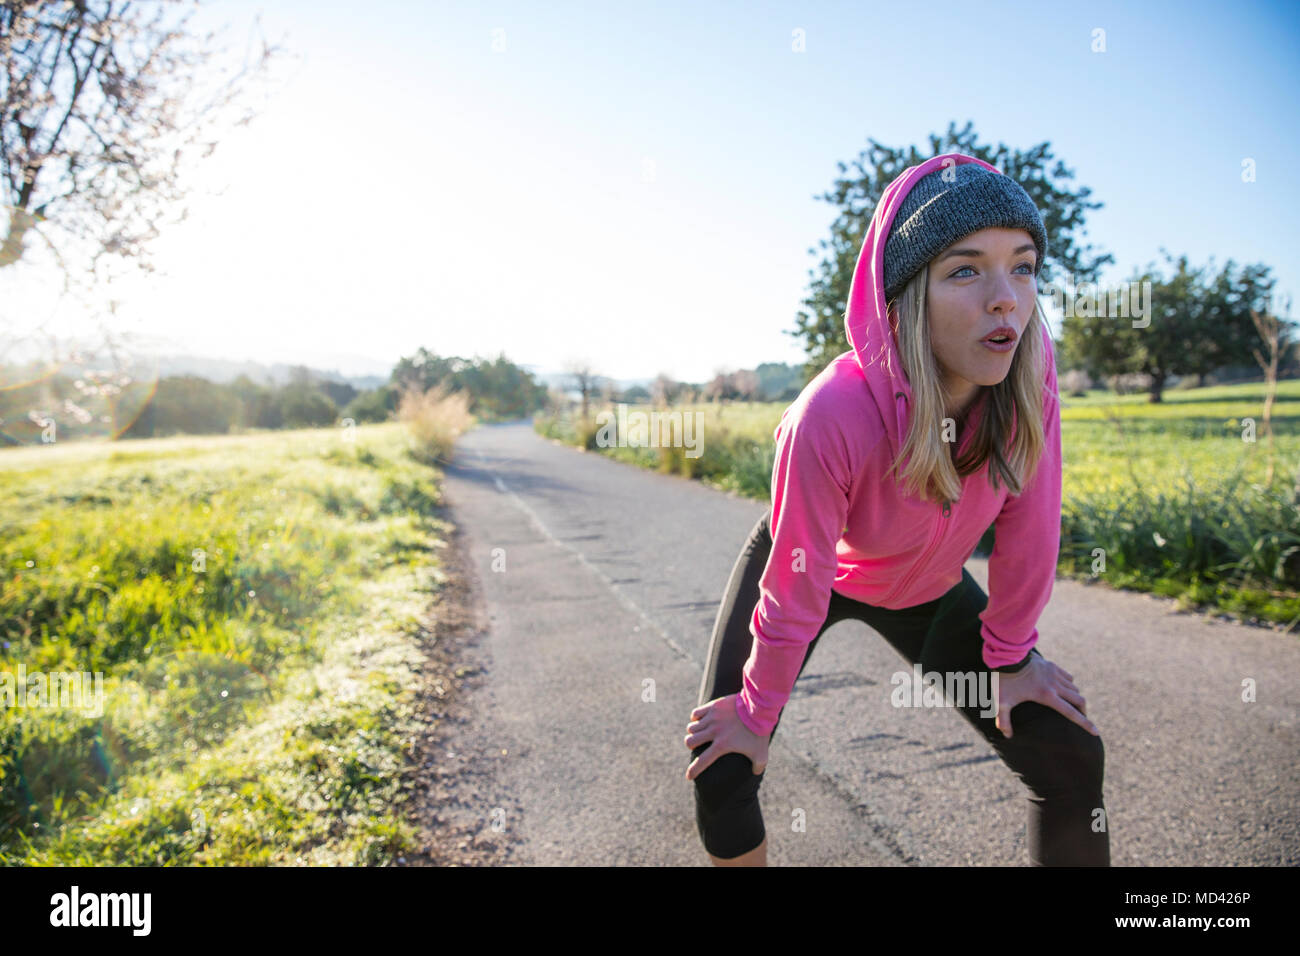 Young woman outdoors, taking a break from exercising, hands on knees Stock Photo